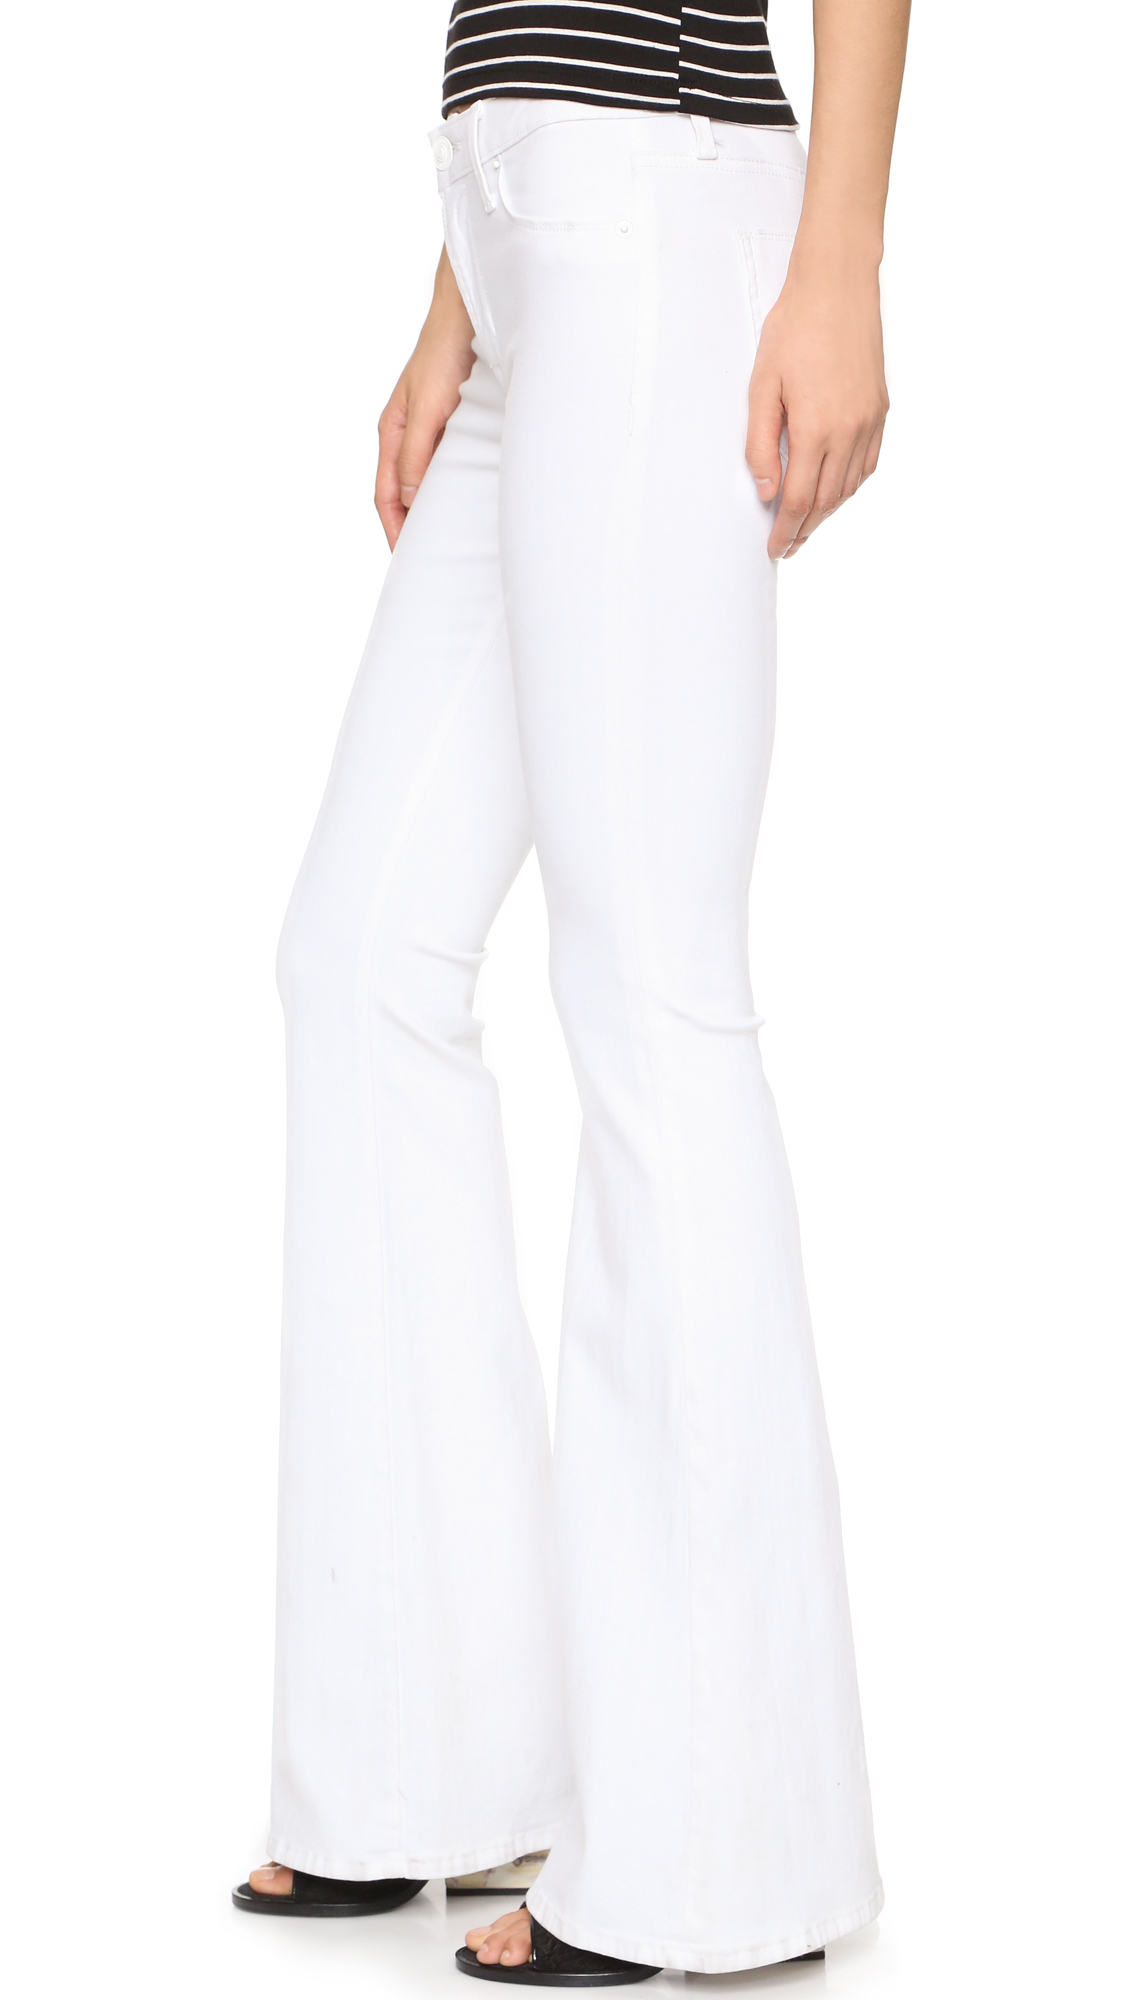 Hudson jeans Signature Petite Boot Cut Jeans in White | Lyst